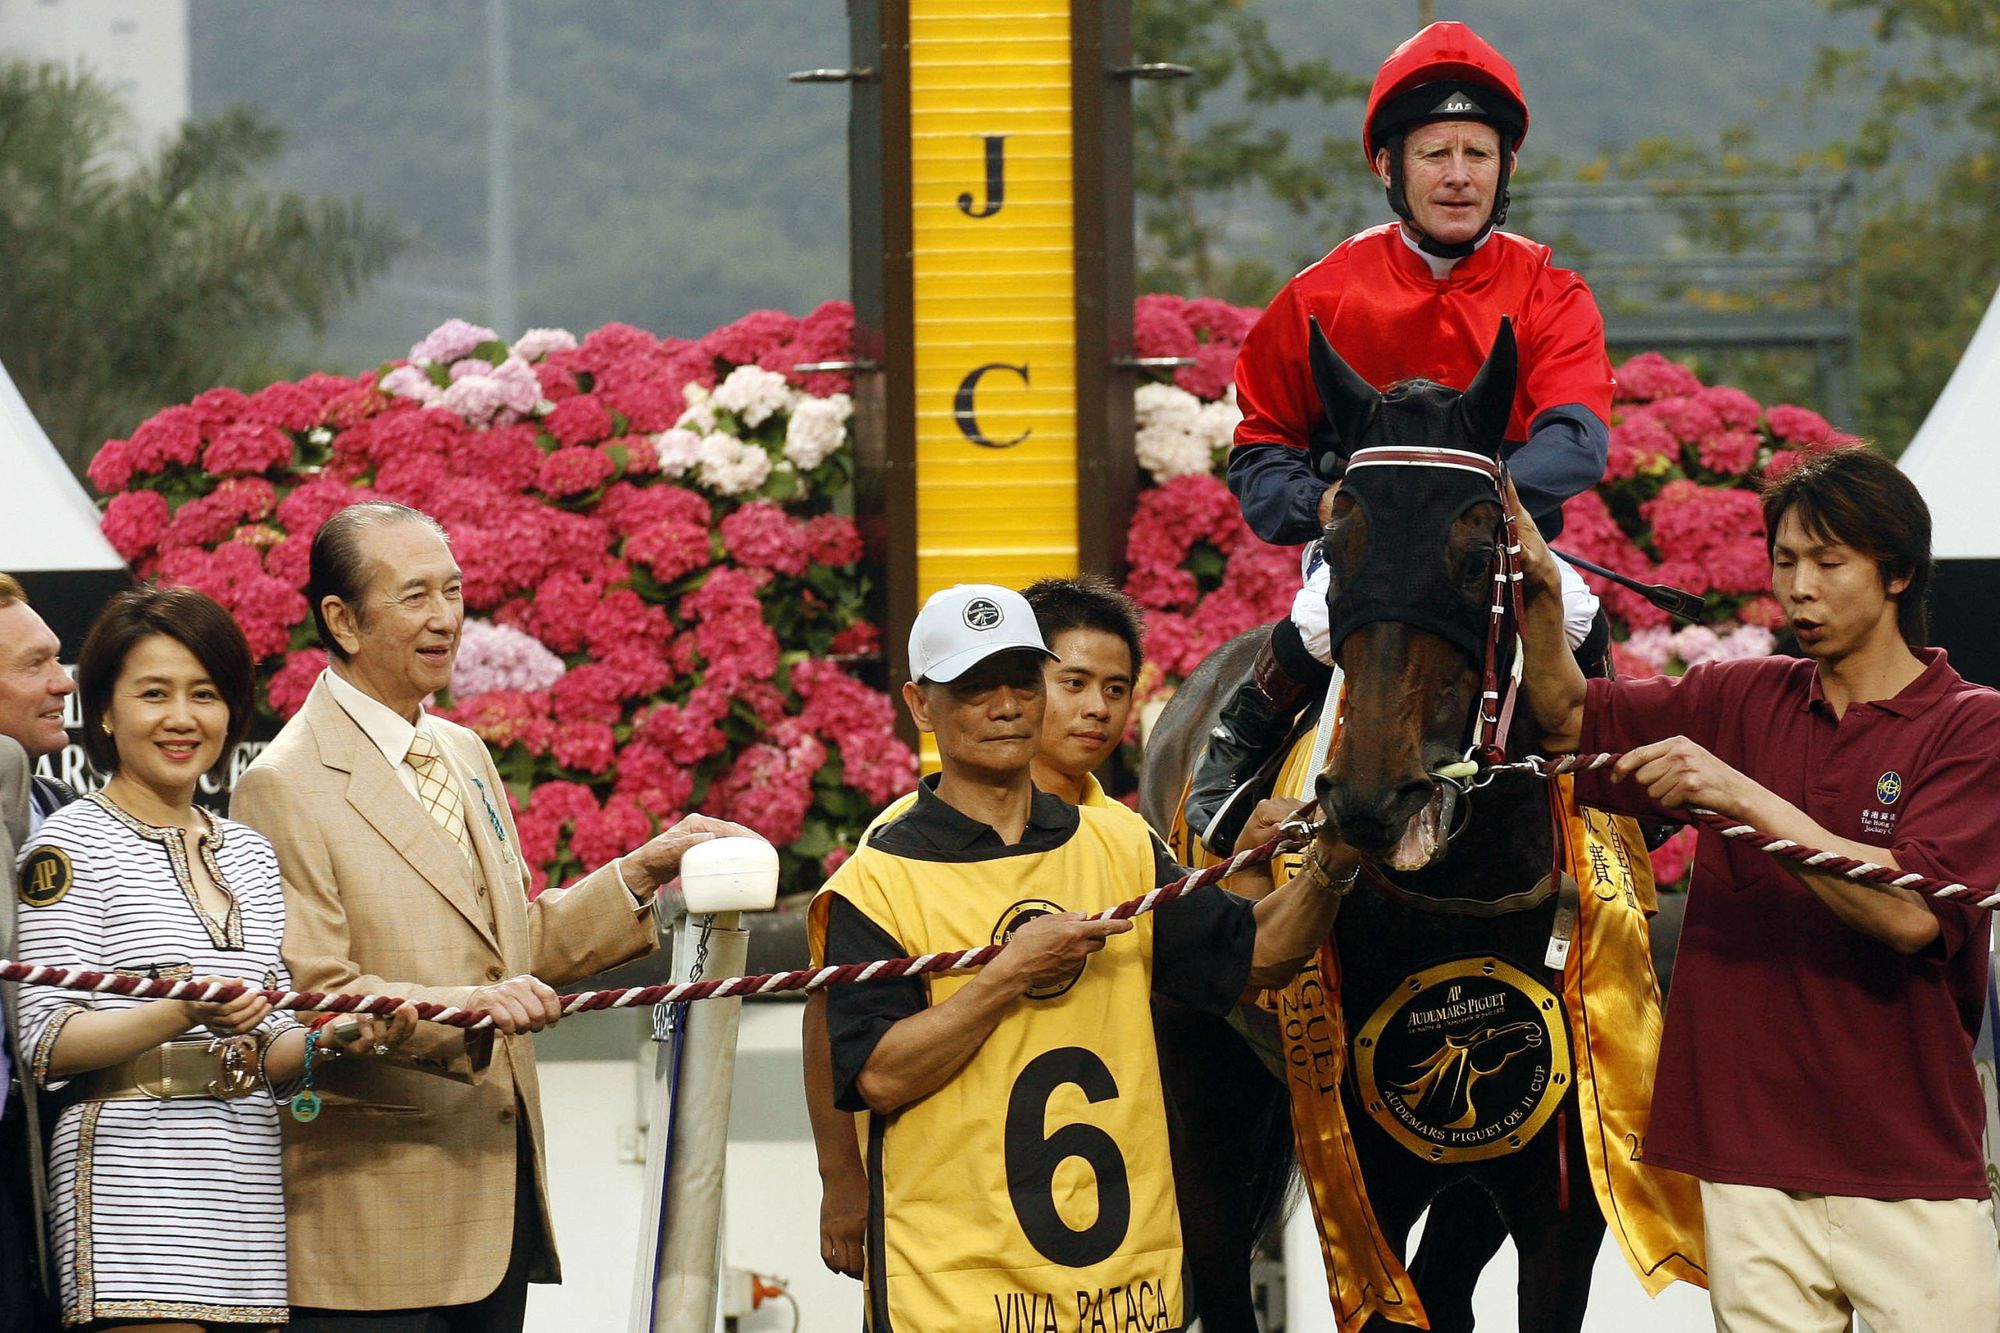 Stanley Ho’s celebrated horse Viva Pataca [named after the Macanese pataca currency] earned more than USD8m in prize money and was Hong Kong Horse of the Year in 2009.